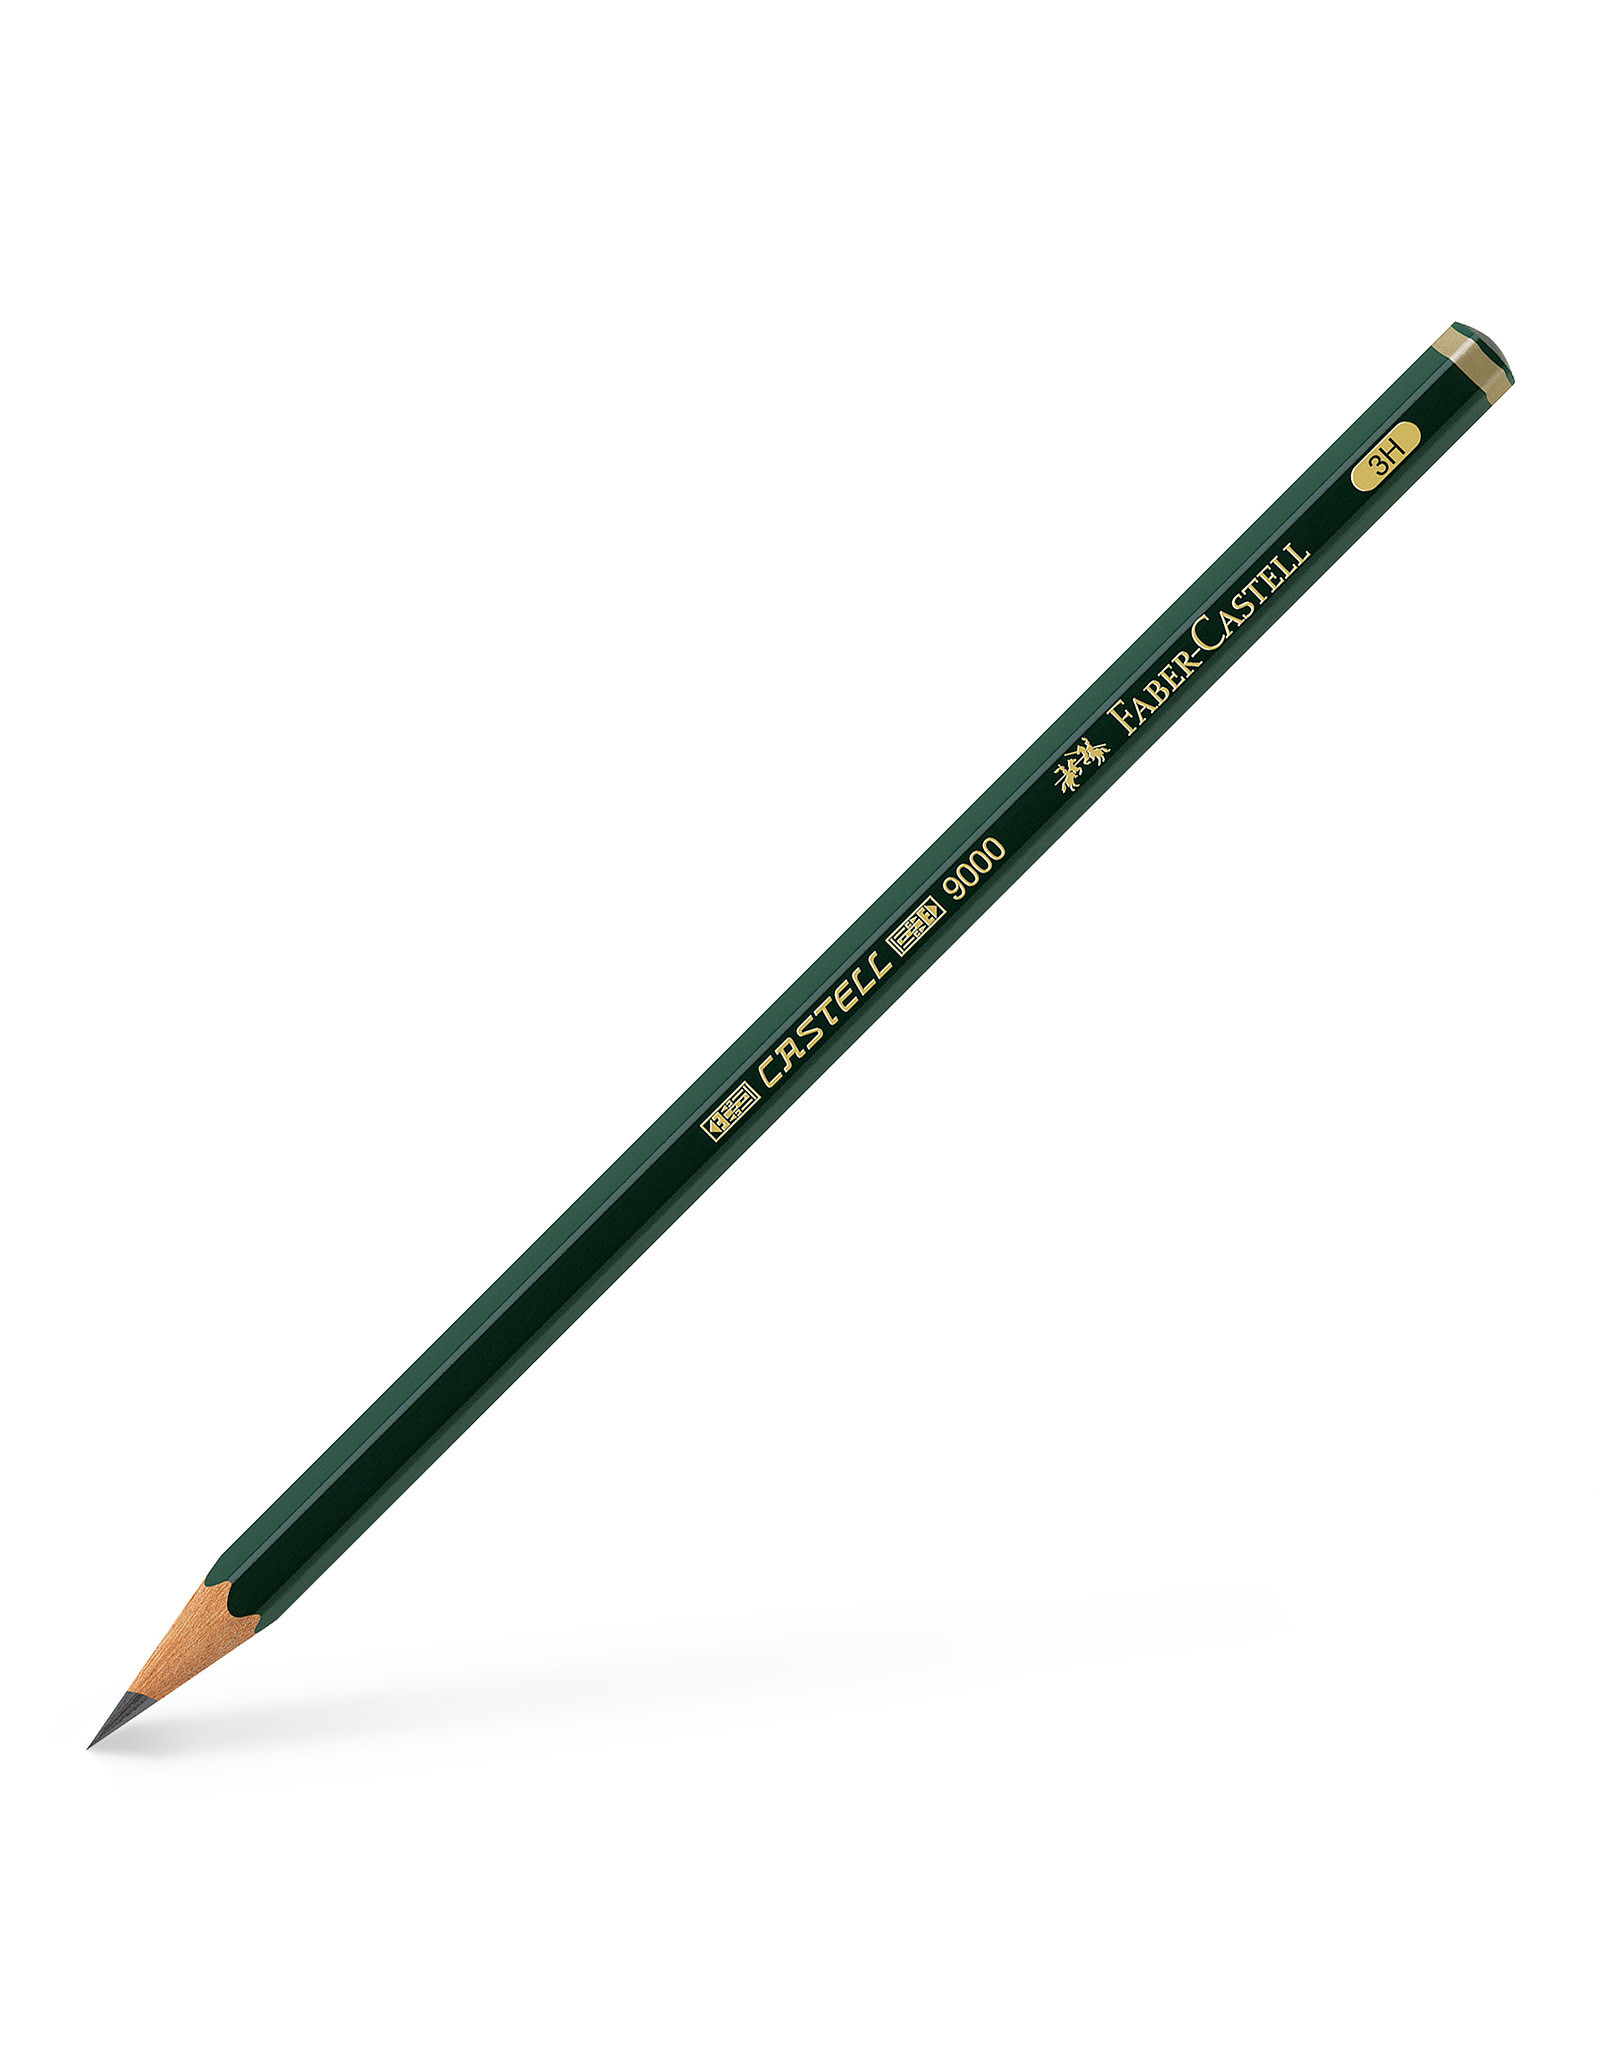 FABER-CASTELL Castell® 9000 Graphite Pencil, 3H